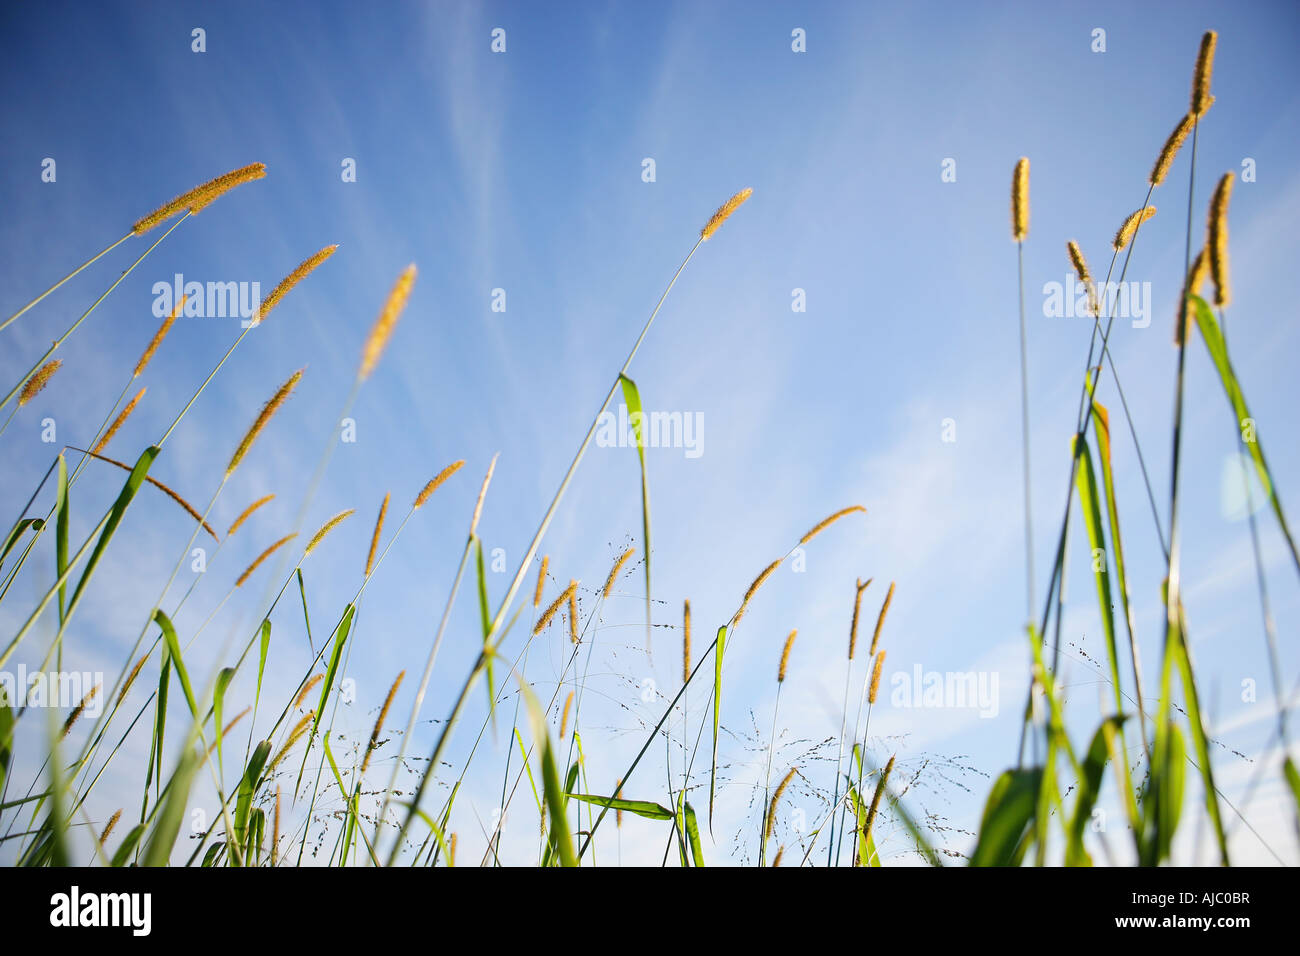 Low Angle View of Water Grass Stock Photo